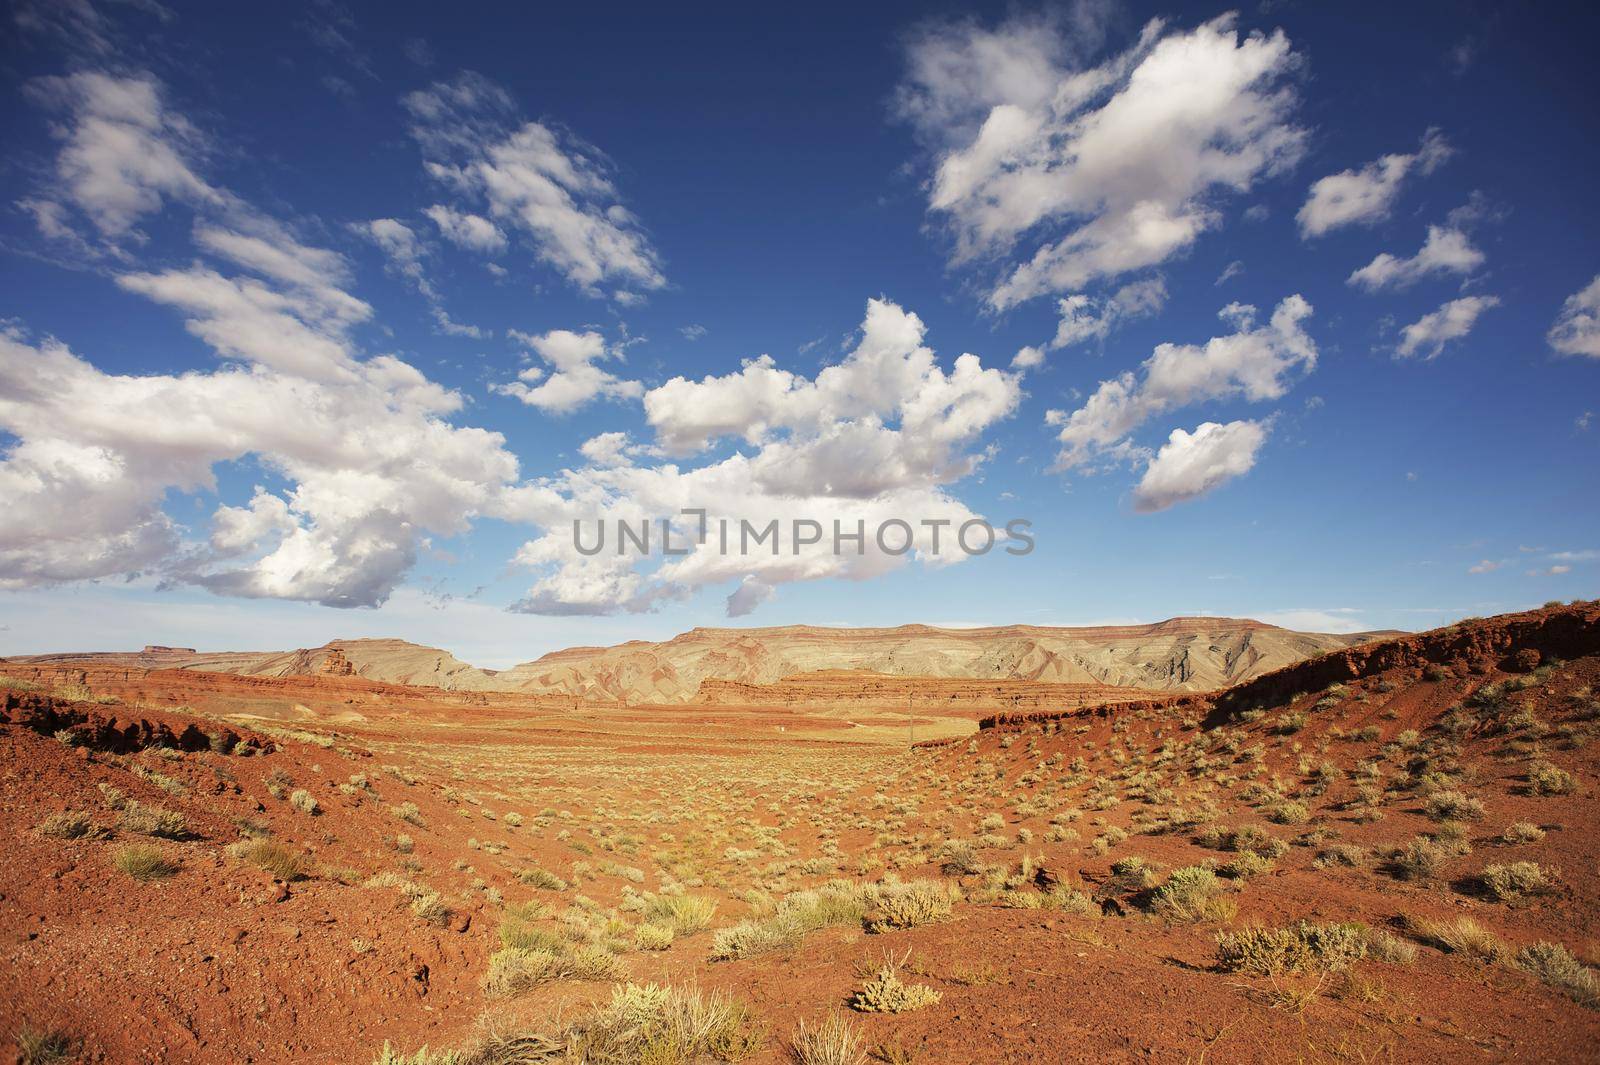 Mexican Hat Utah. Raw Mexican Hat Desert Landscape. Southern Utah State, United States. 